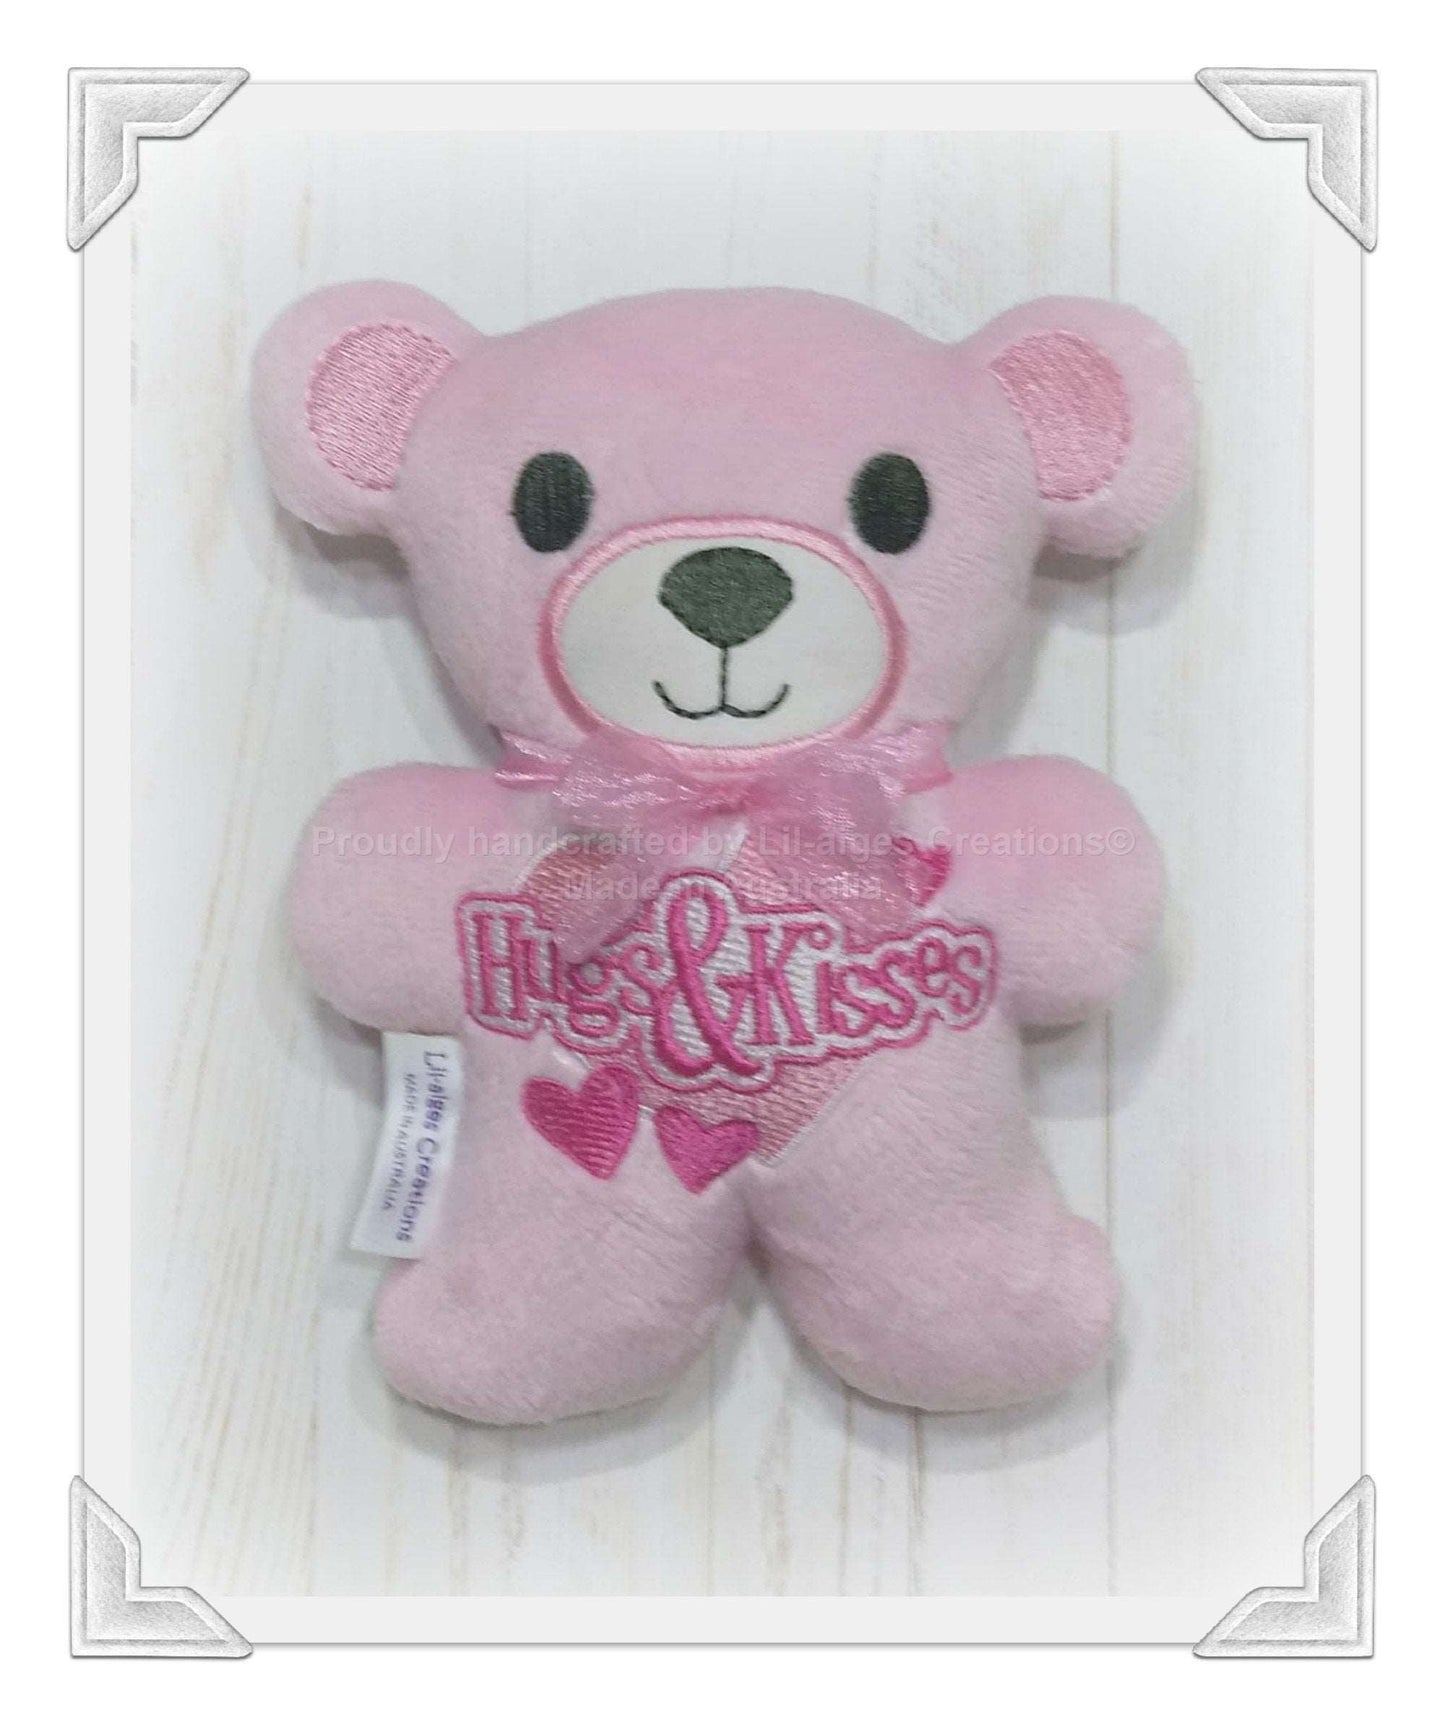 Pink plush minky teddy bear, hugs and kisses, ready to ship, made in Australia - Lil-aiges Creations - Quality Australian-made Gifts